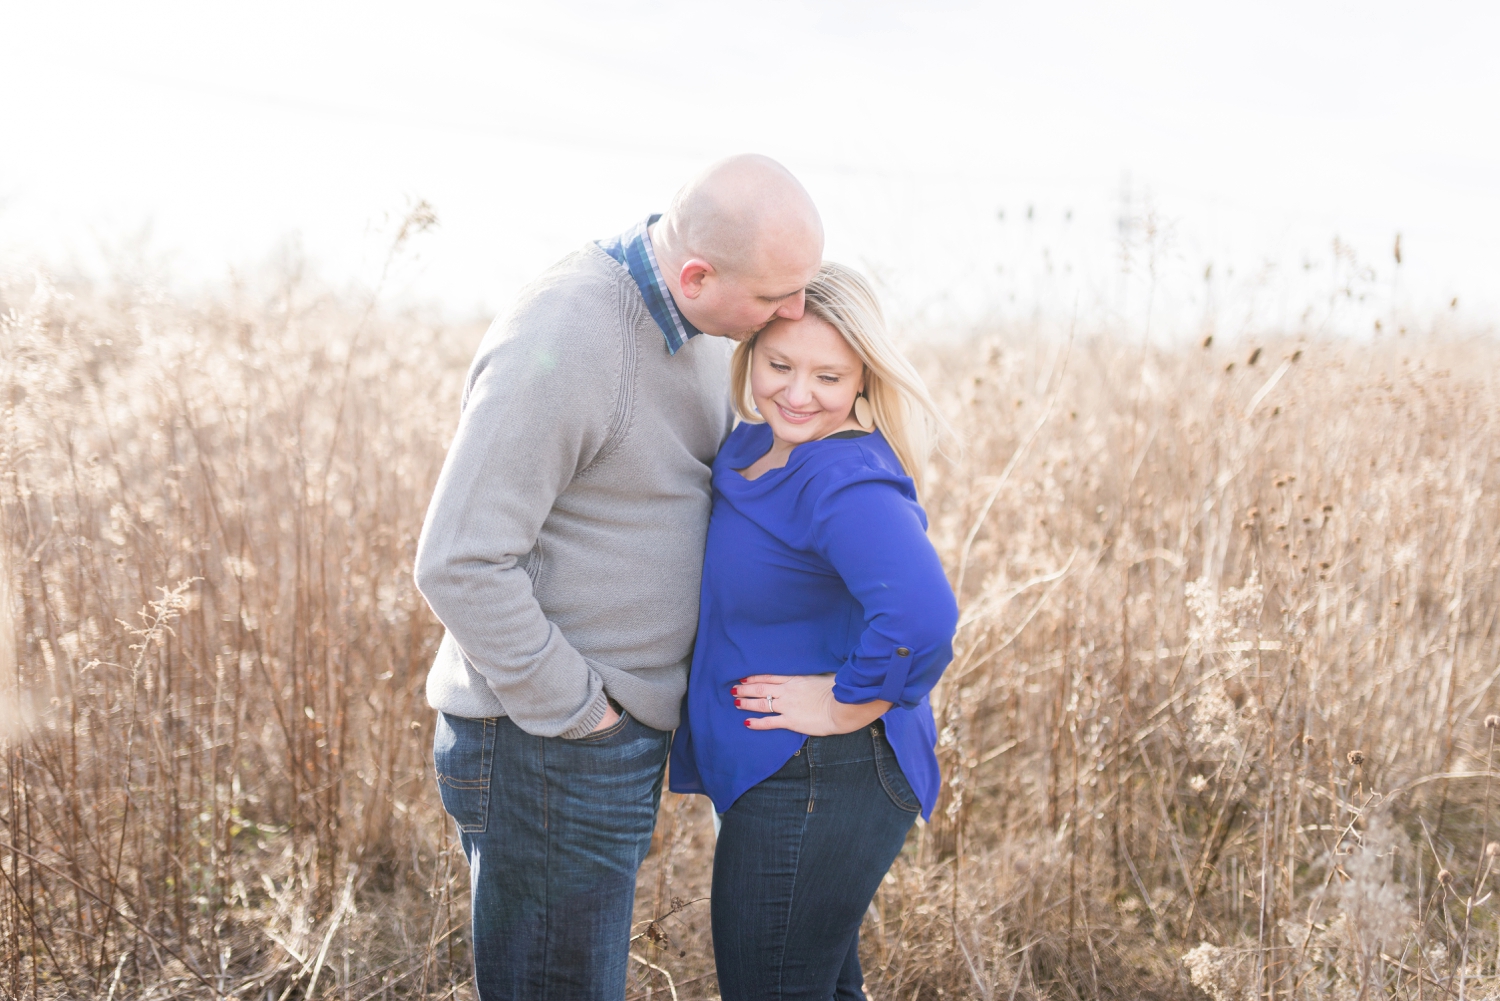 winter-engaged-couple-at-their-photo-session-at-the-scioto-audubon-park-near-grange-audubon-center-with-walkways-and-grass_0326